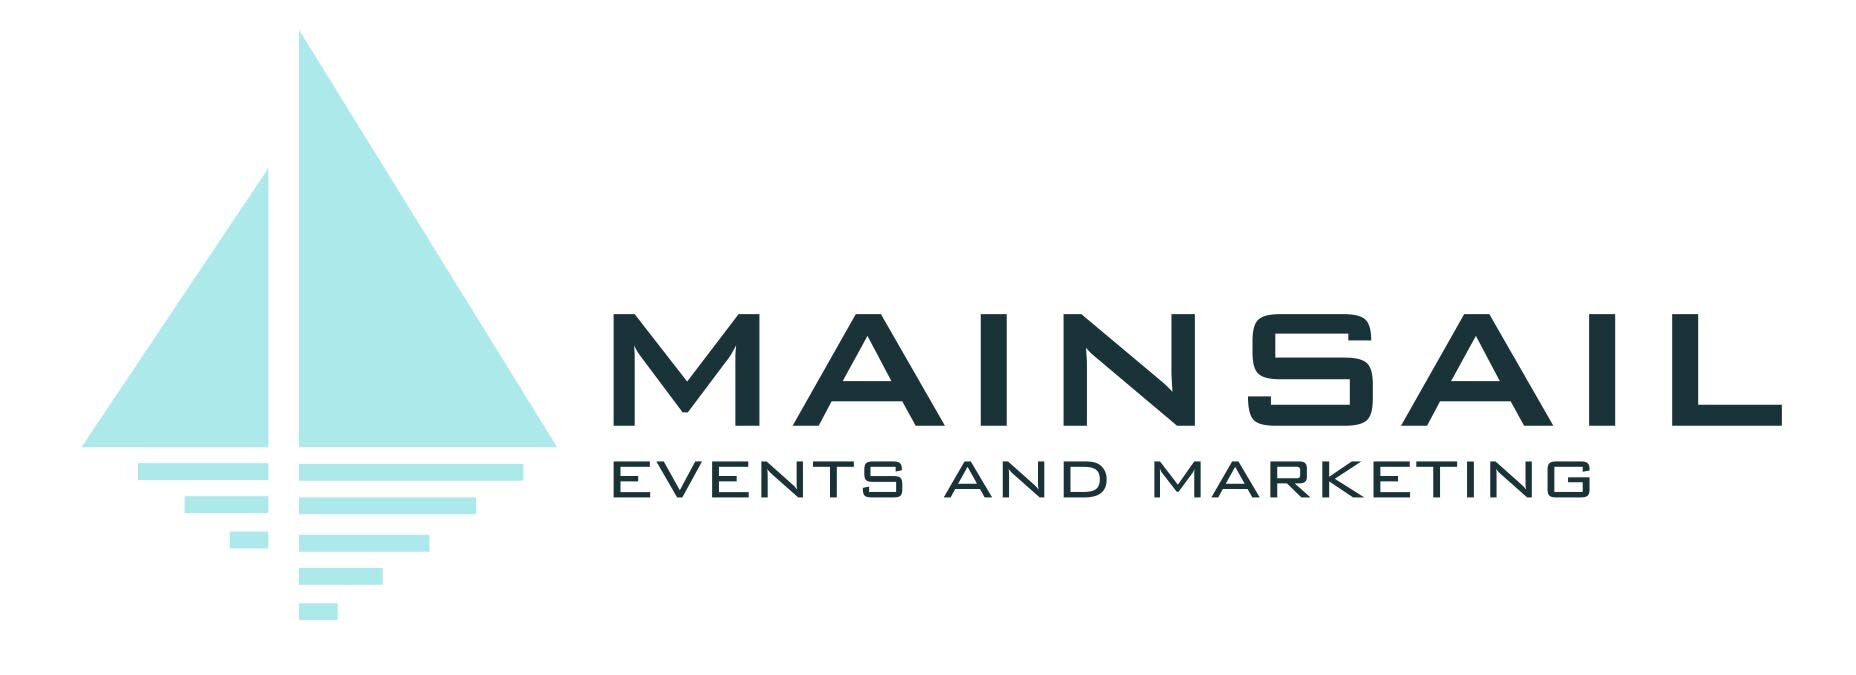 Mainsail Events and Marketing blue letters.jpg